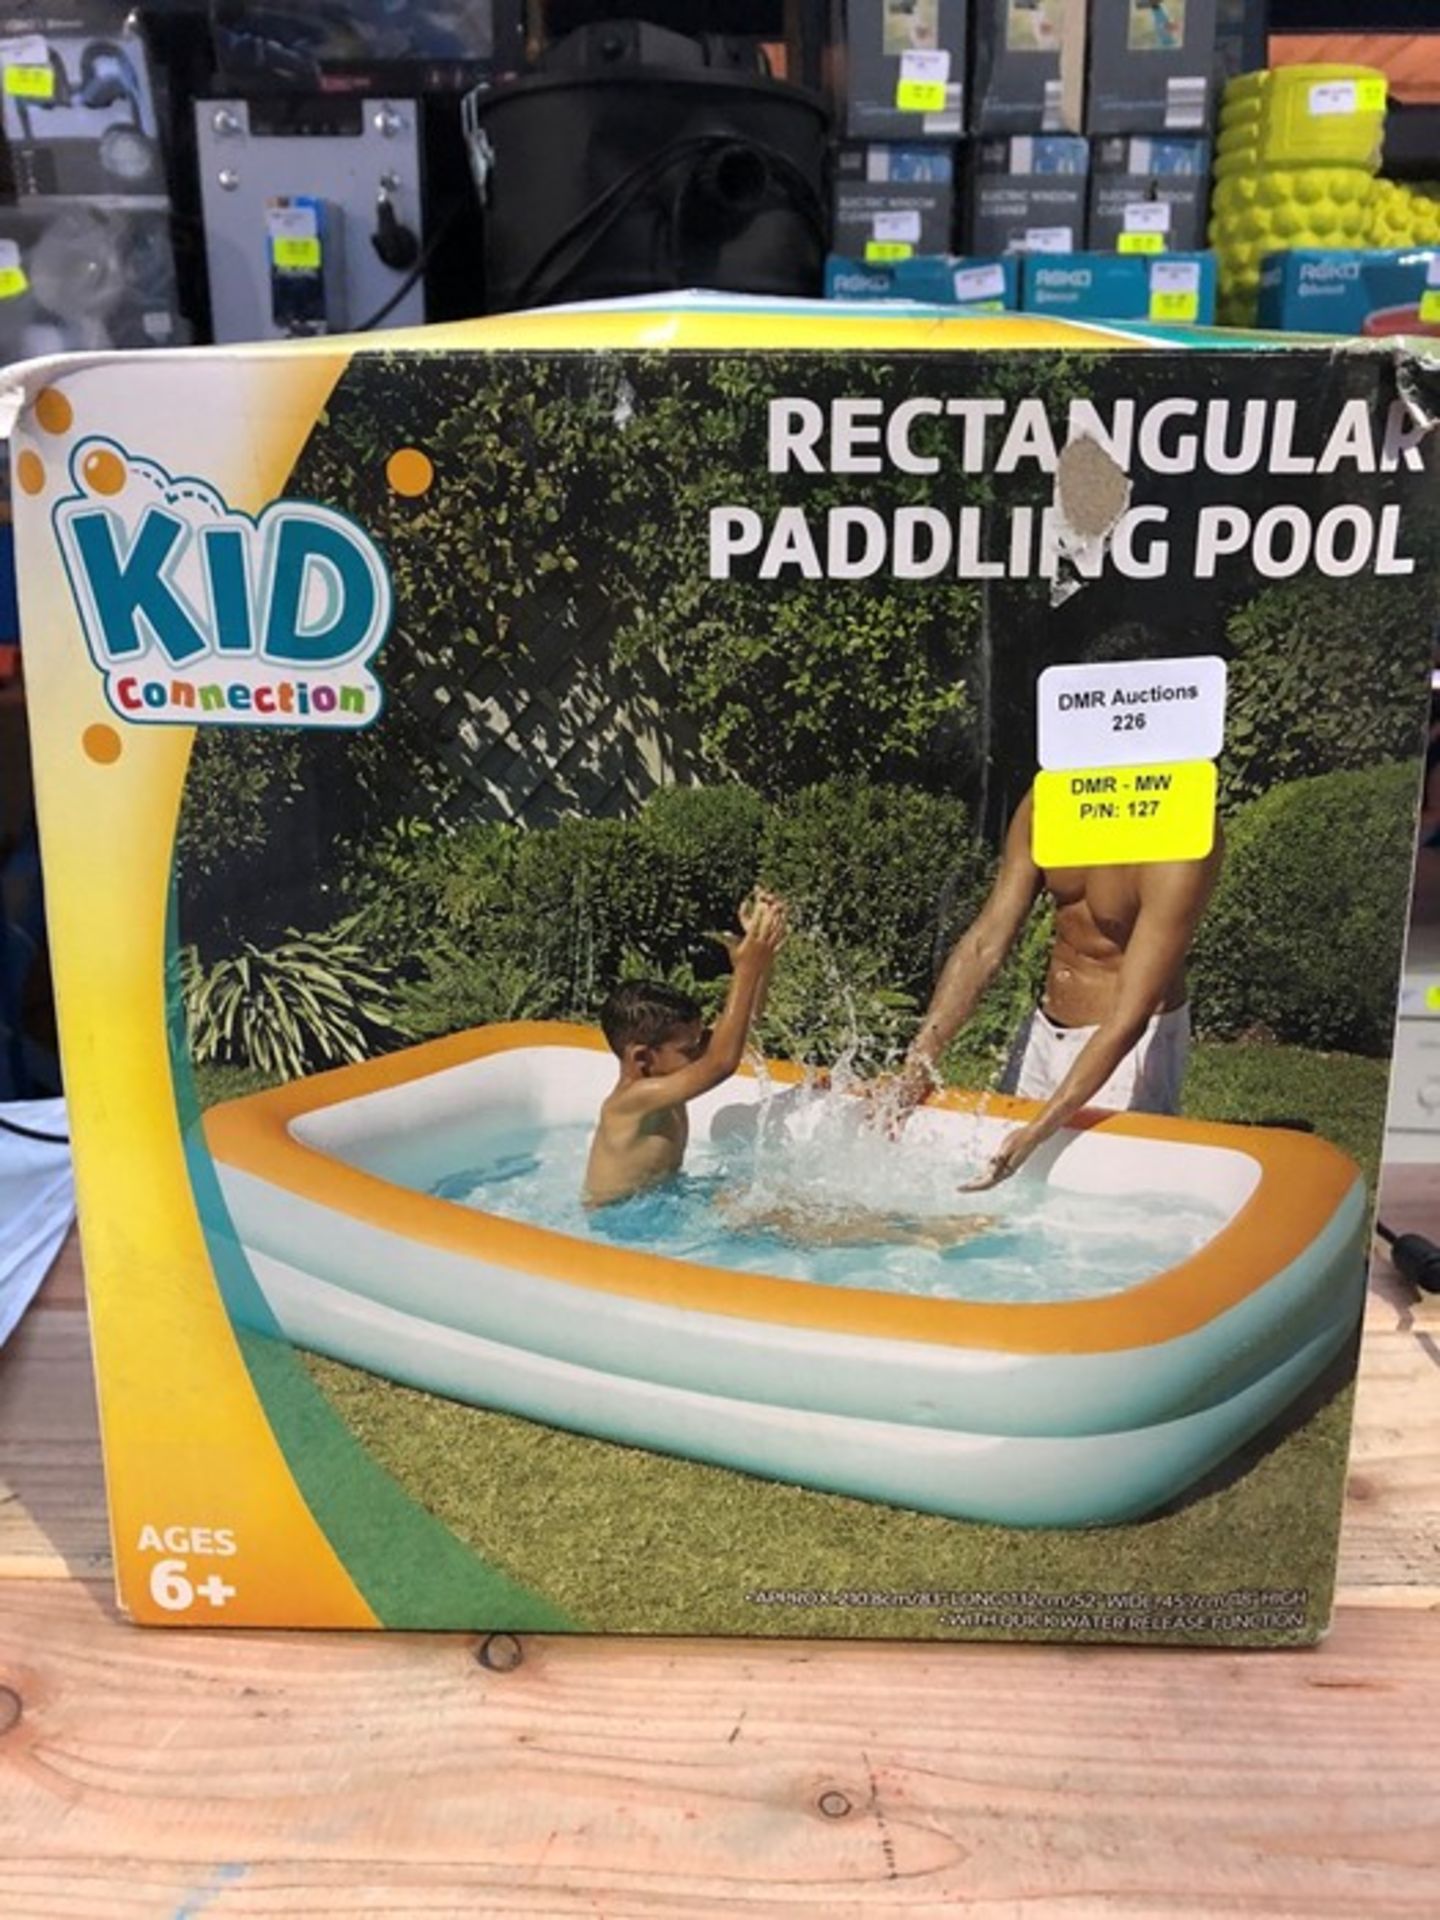 1 BOXED KID CONNECTION RECTANGULAR FAMILY POOL / RRP £24.99 (PUBLIC VIEWING AVAILABLE)